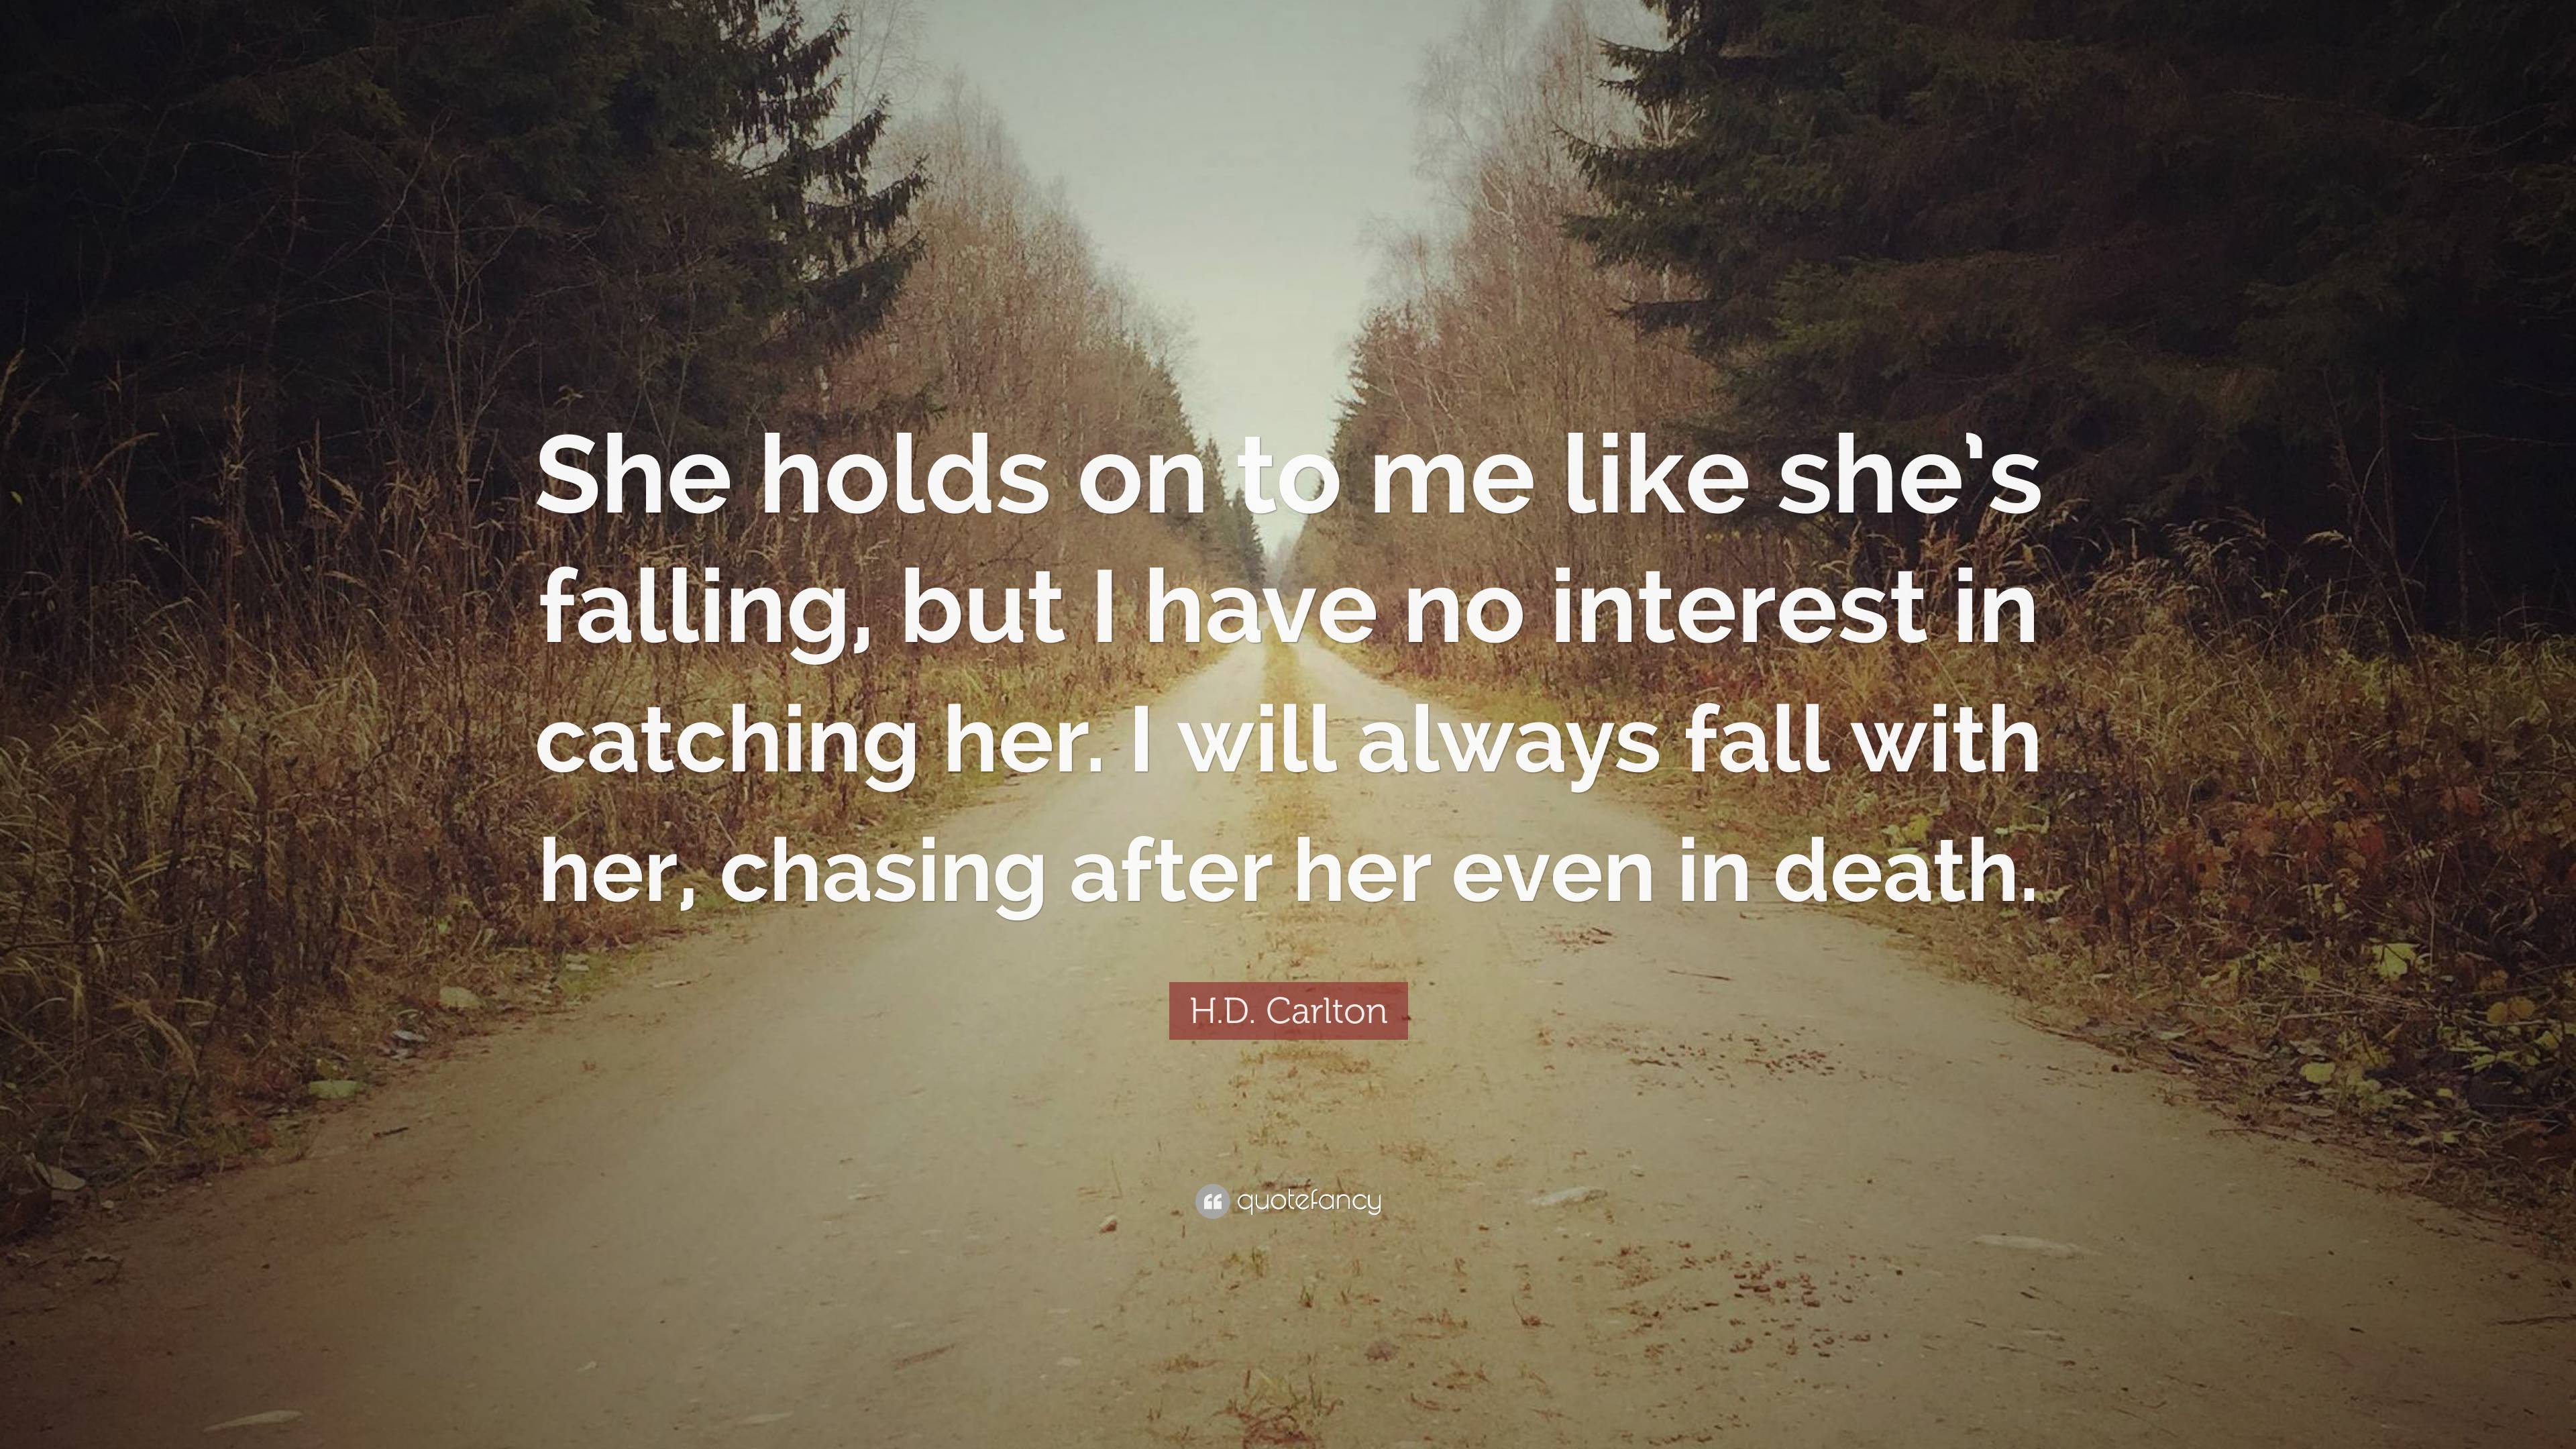 H.D. Carlton Quote: “She holds on to me like she’s falling, but I have ...